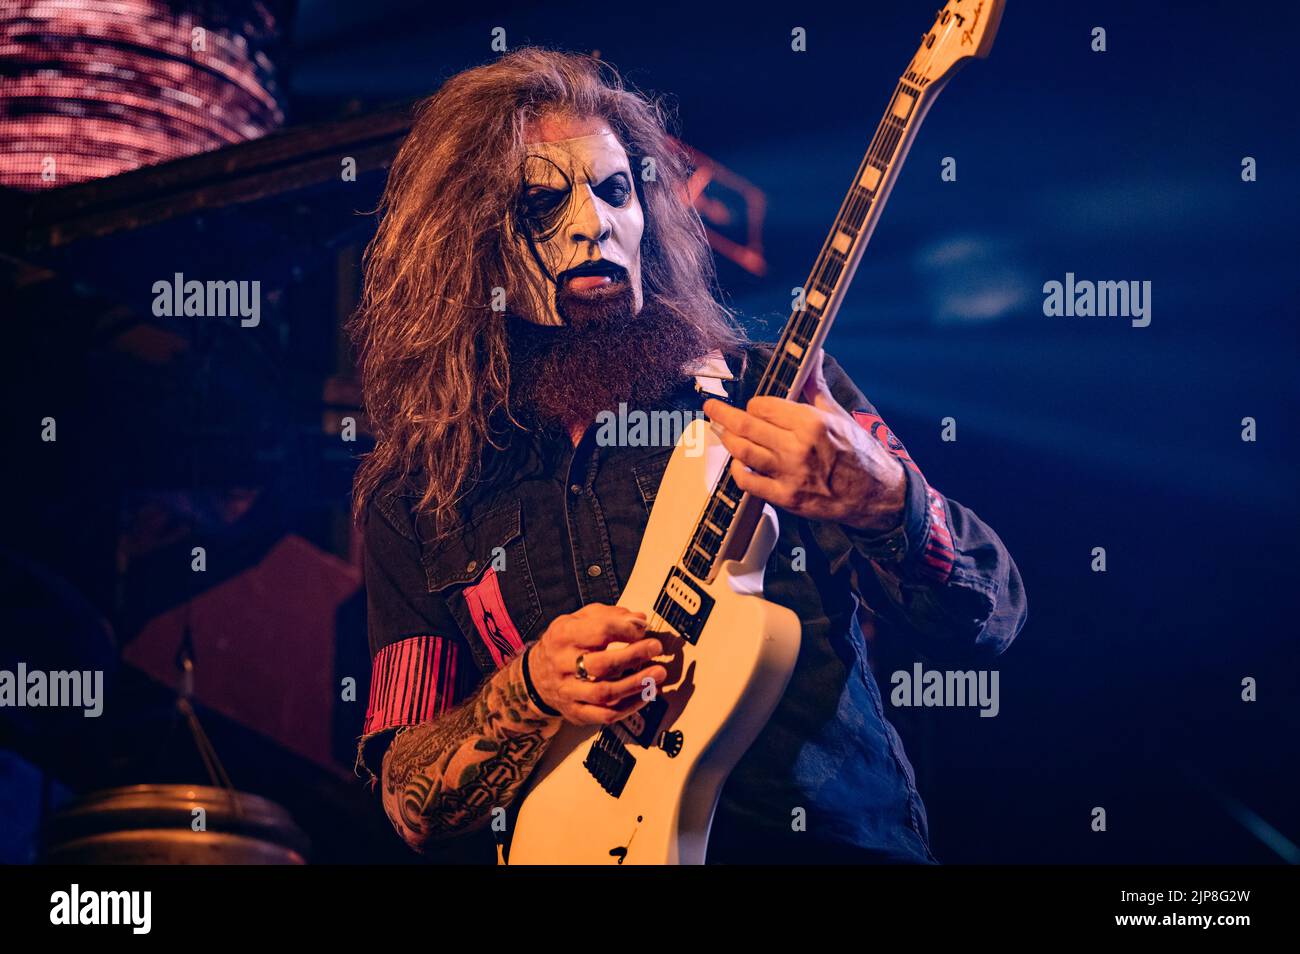 Malmoe, Sweden. 15th Aug, 2022. The American heavy metal band Slipknot performs a live concert at Malmö Arena in Malmoe. Here guitarist Jim Root is seen live on stage. (Photo Credit: Gonzales Photo/Alamy Live News Stock Photo